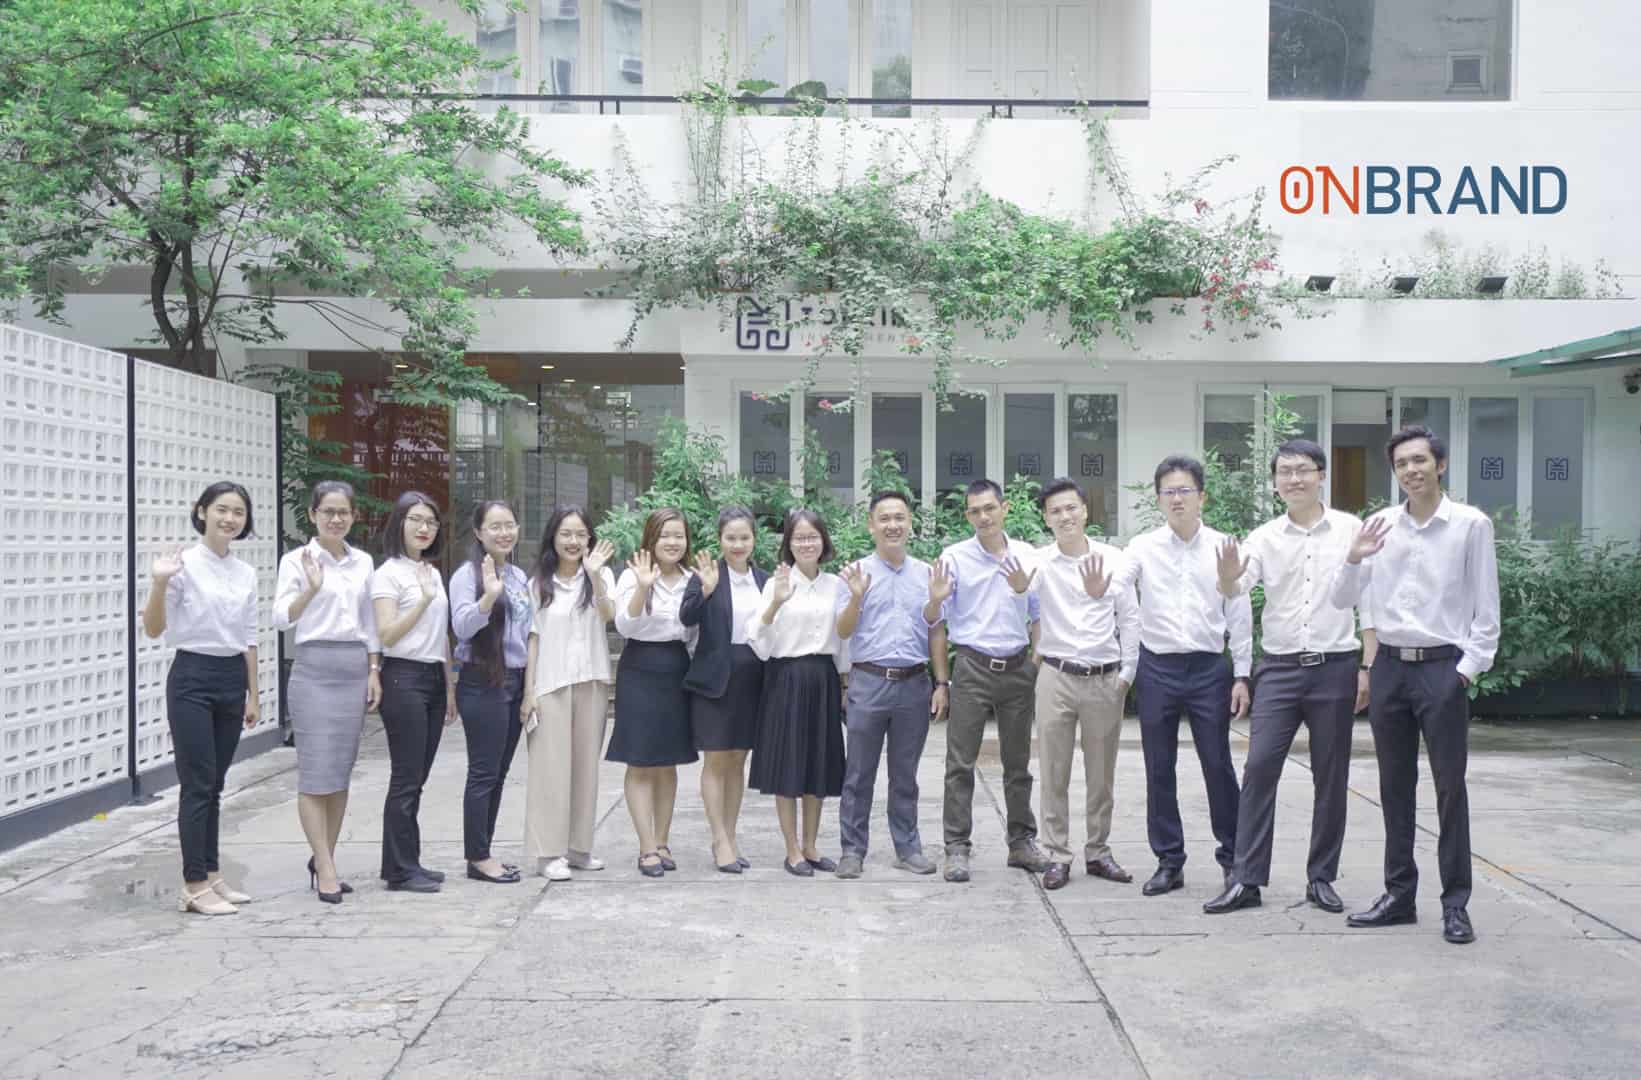 Onbrand employees